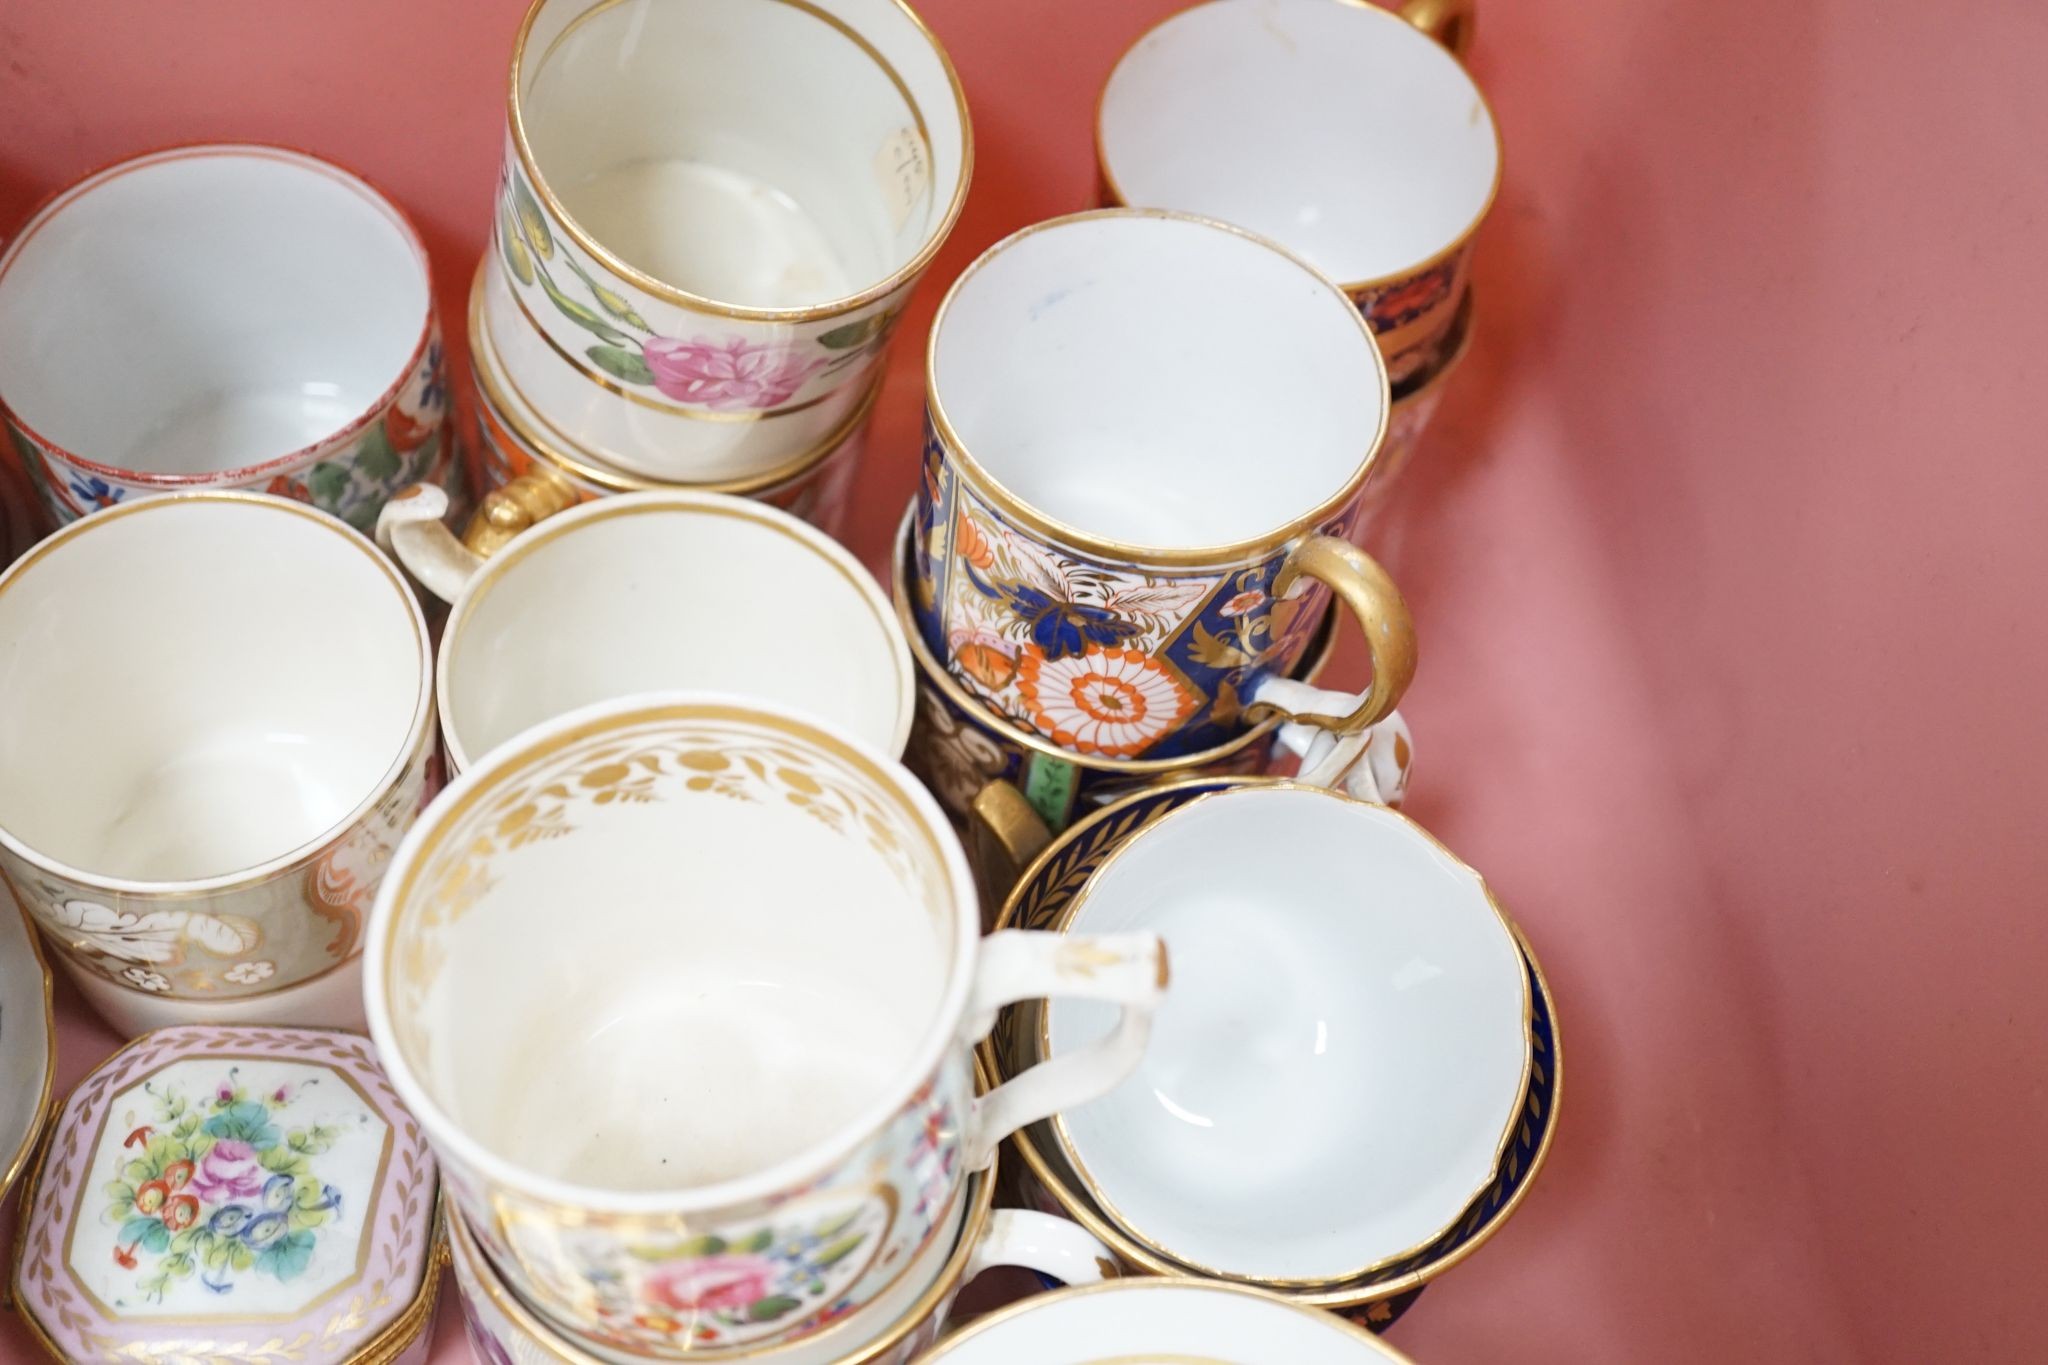 A collection of 19th century English porcelain tea and coffee cups, saucers and other tableware including Royal Crown Derby etc.